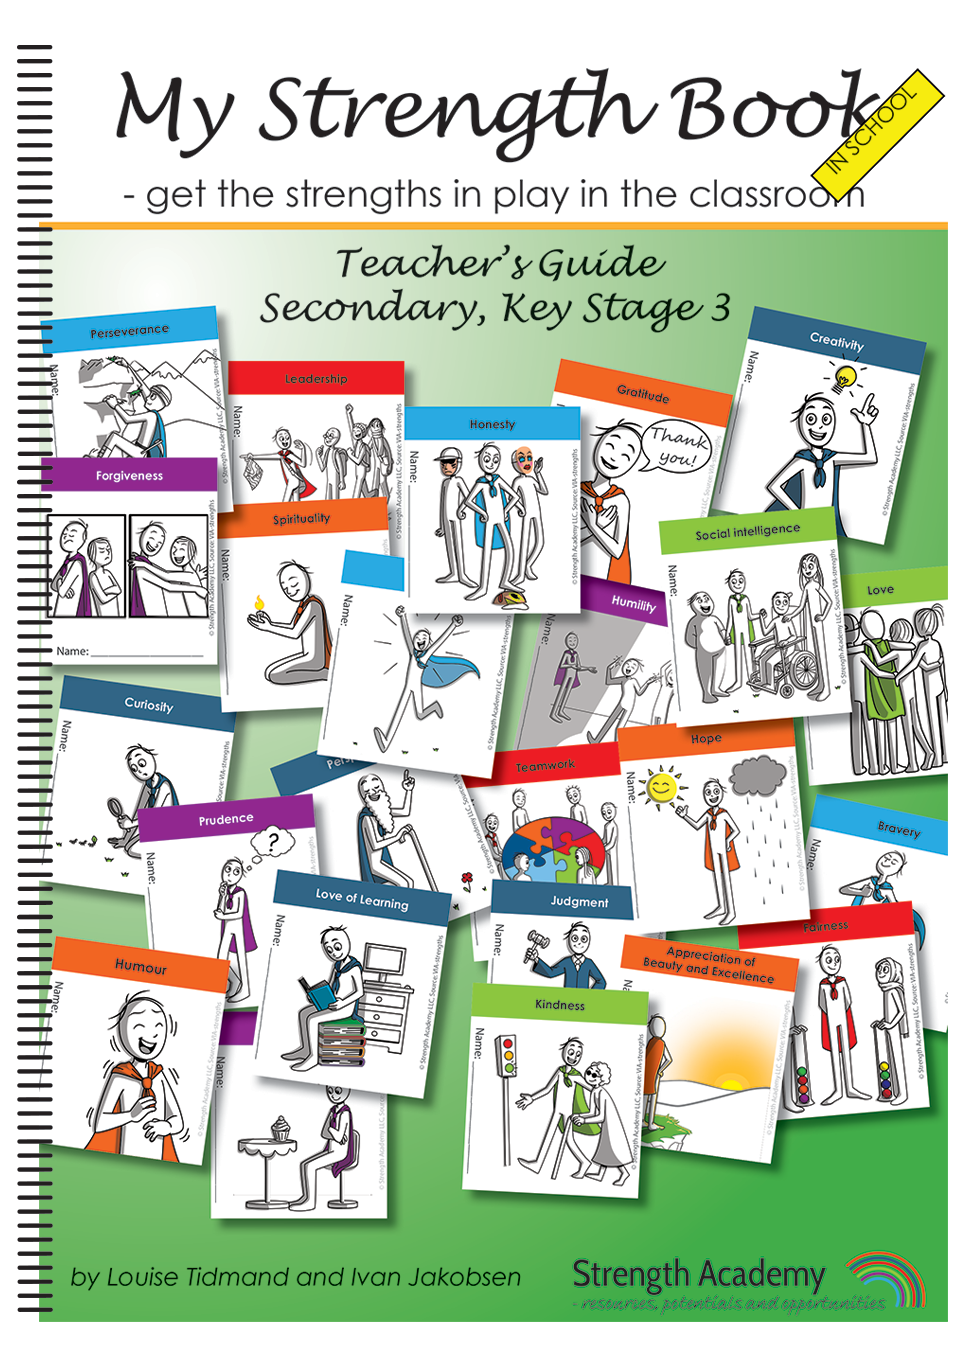 My Strength Book in School- get the strengths in play in the classroom, KS3, teacher's guide